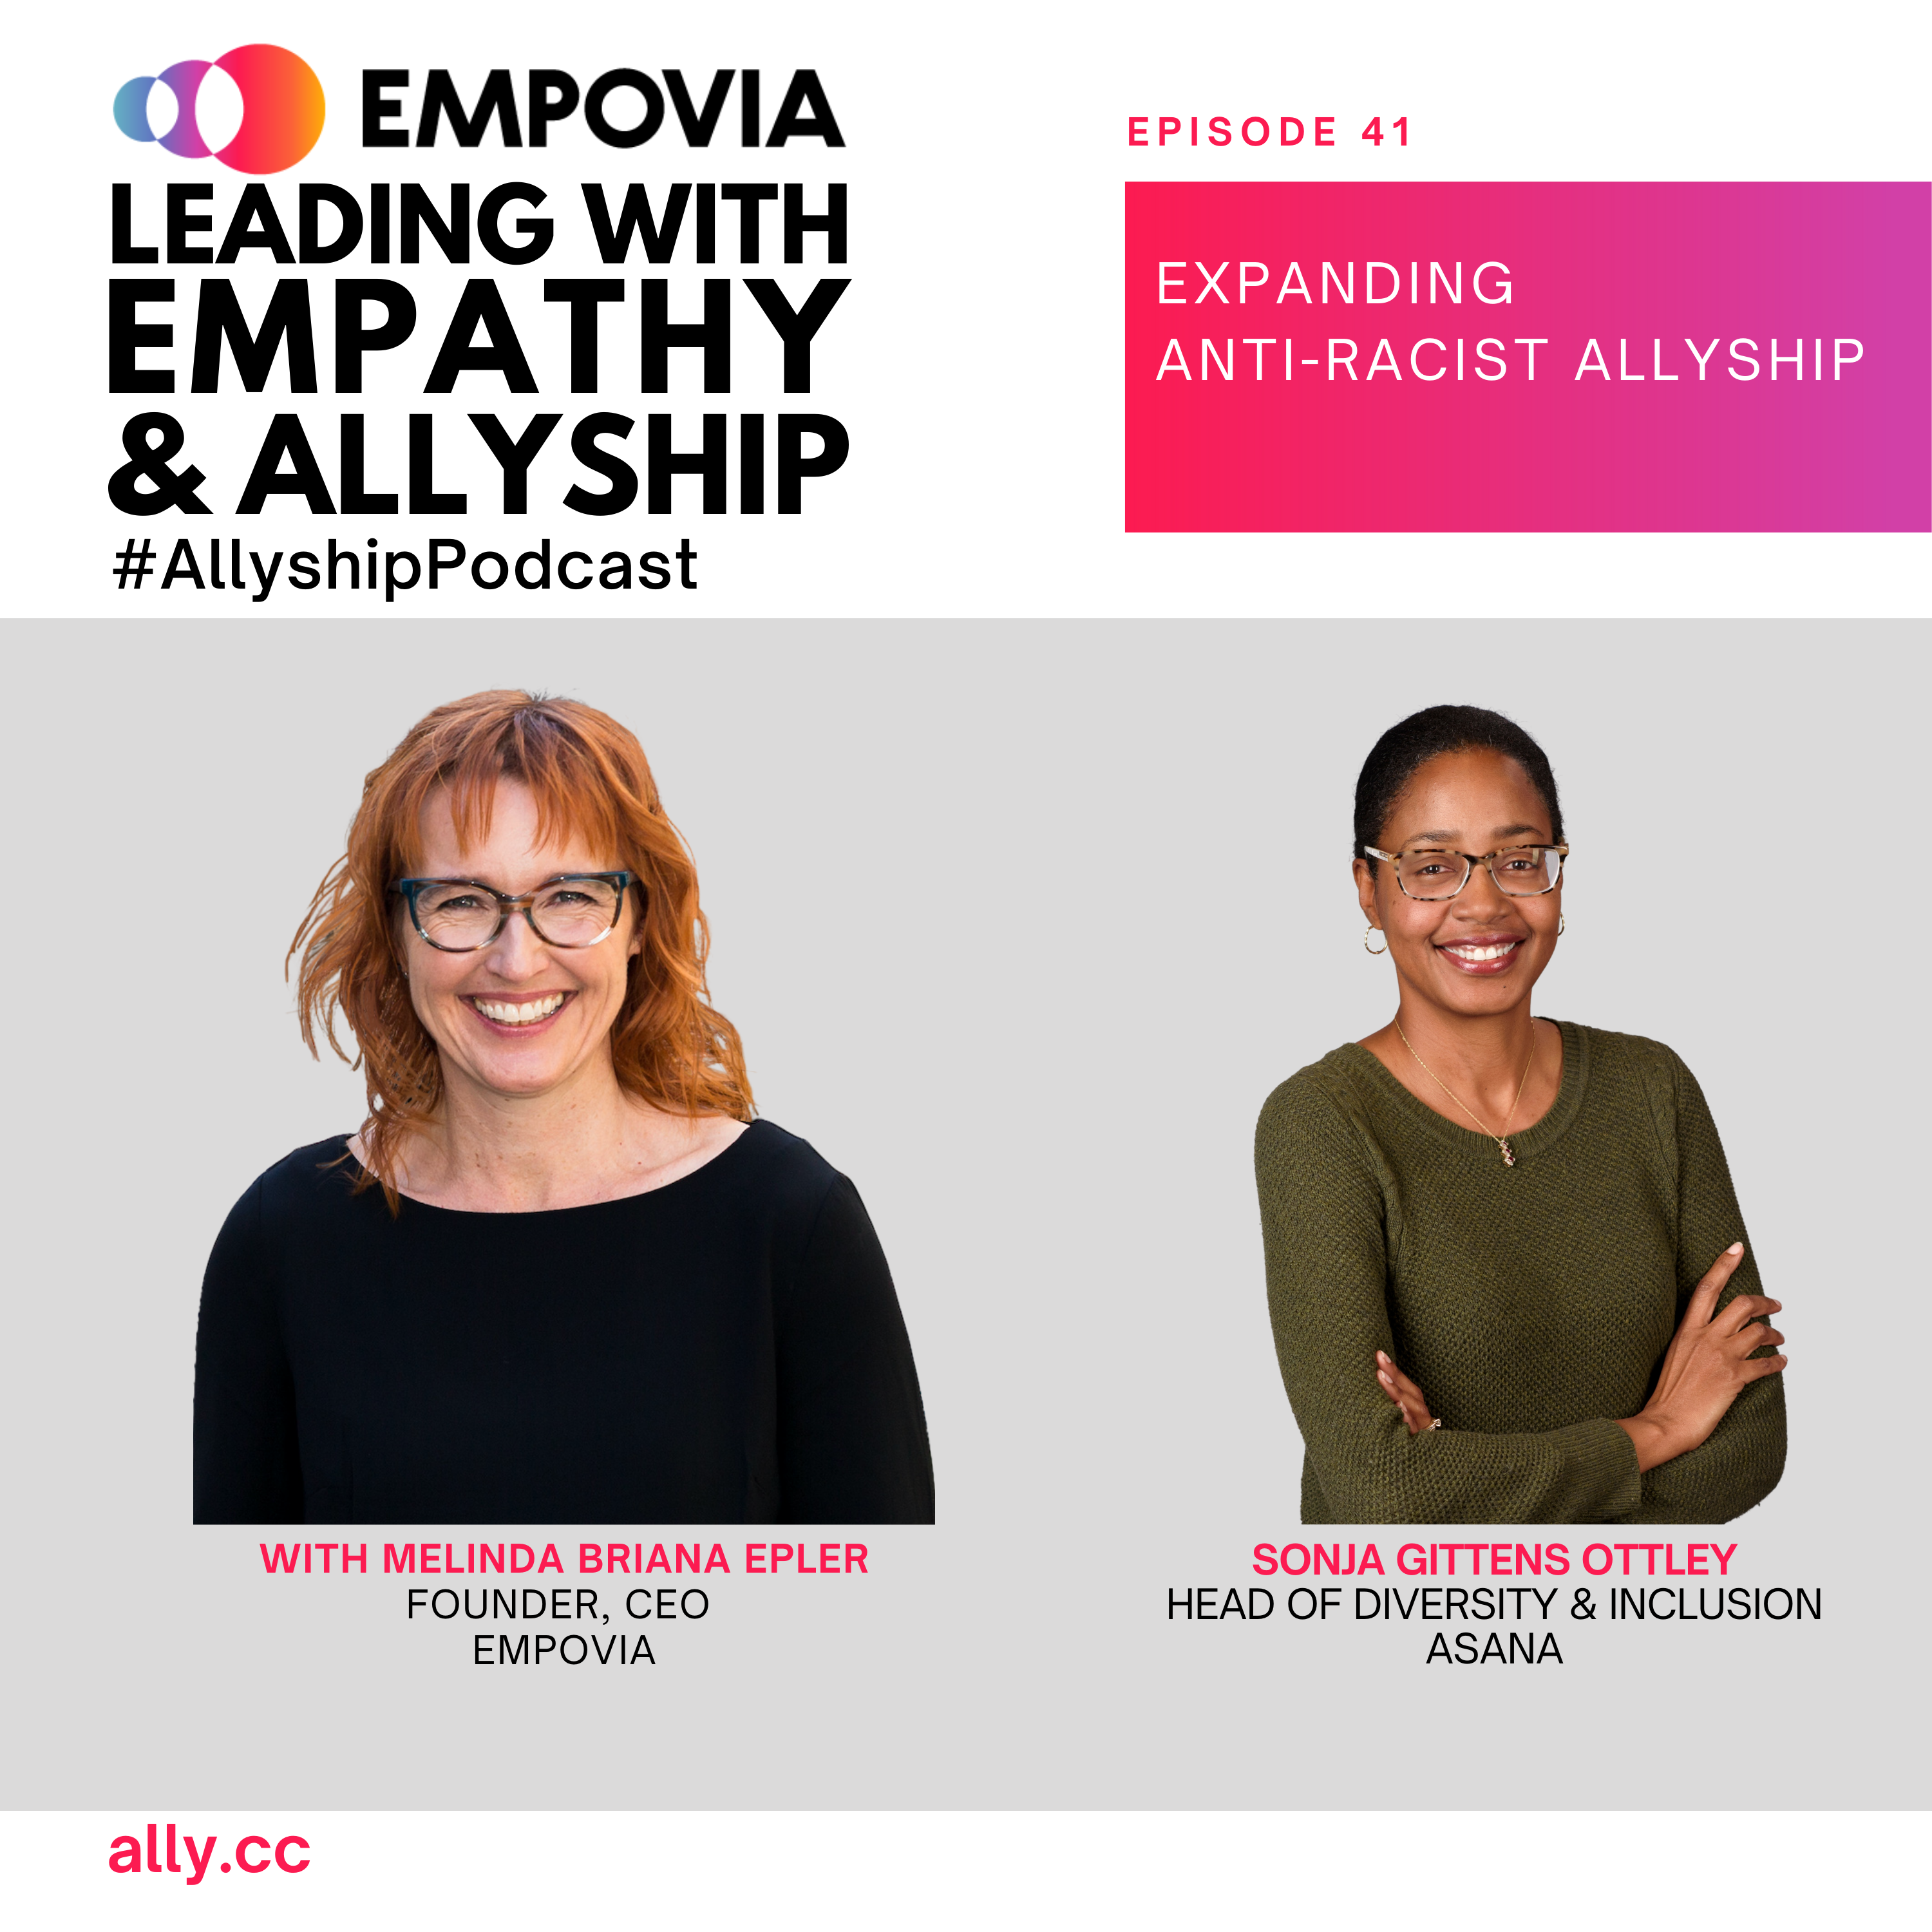 Leading With Empathy & Allyship promo with the Empovia logo and photos of host Melinda Briana Epler, a White woman with red hair and glasses, and Sonja Gittens Ottley, a Black woman with tied black hair, green shirt, leopard eyeglasses, golden earrings and necklace.